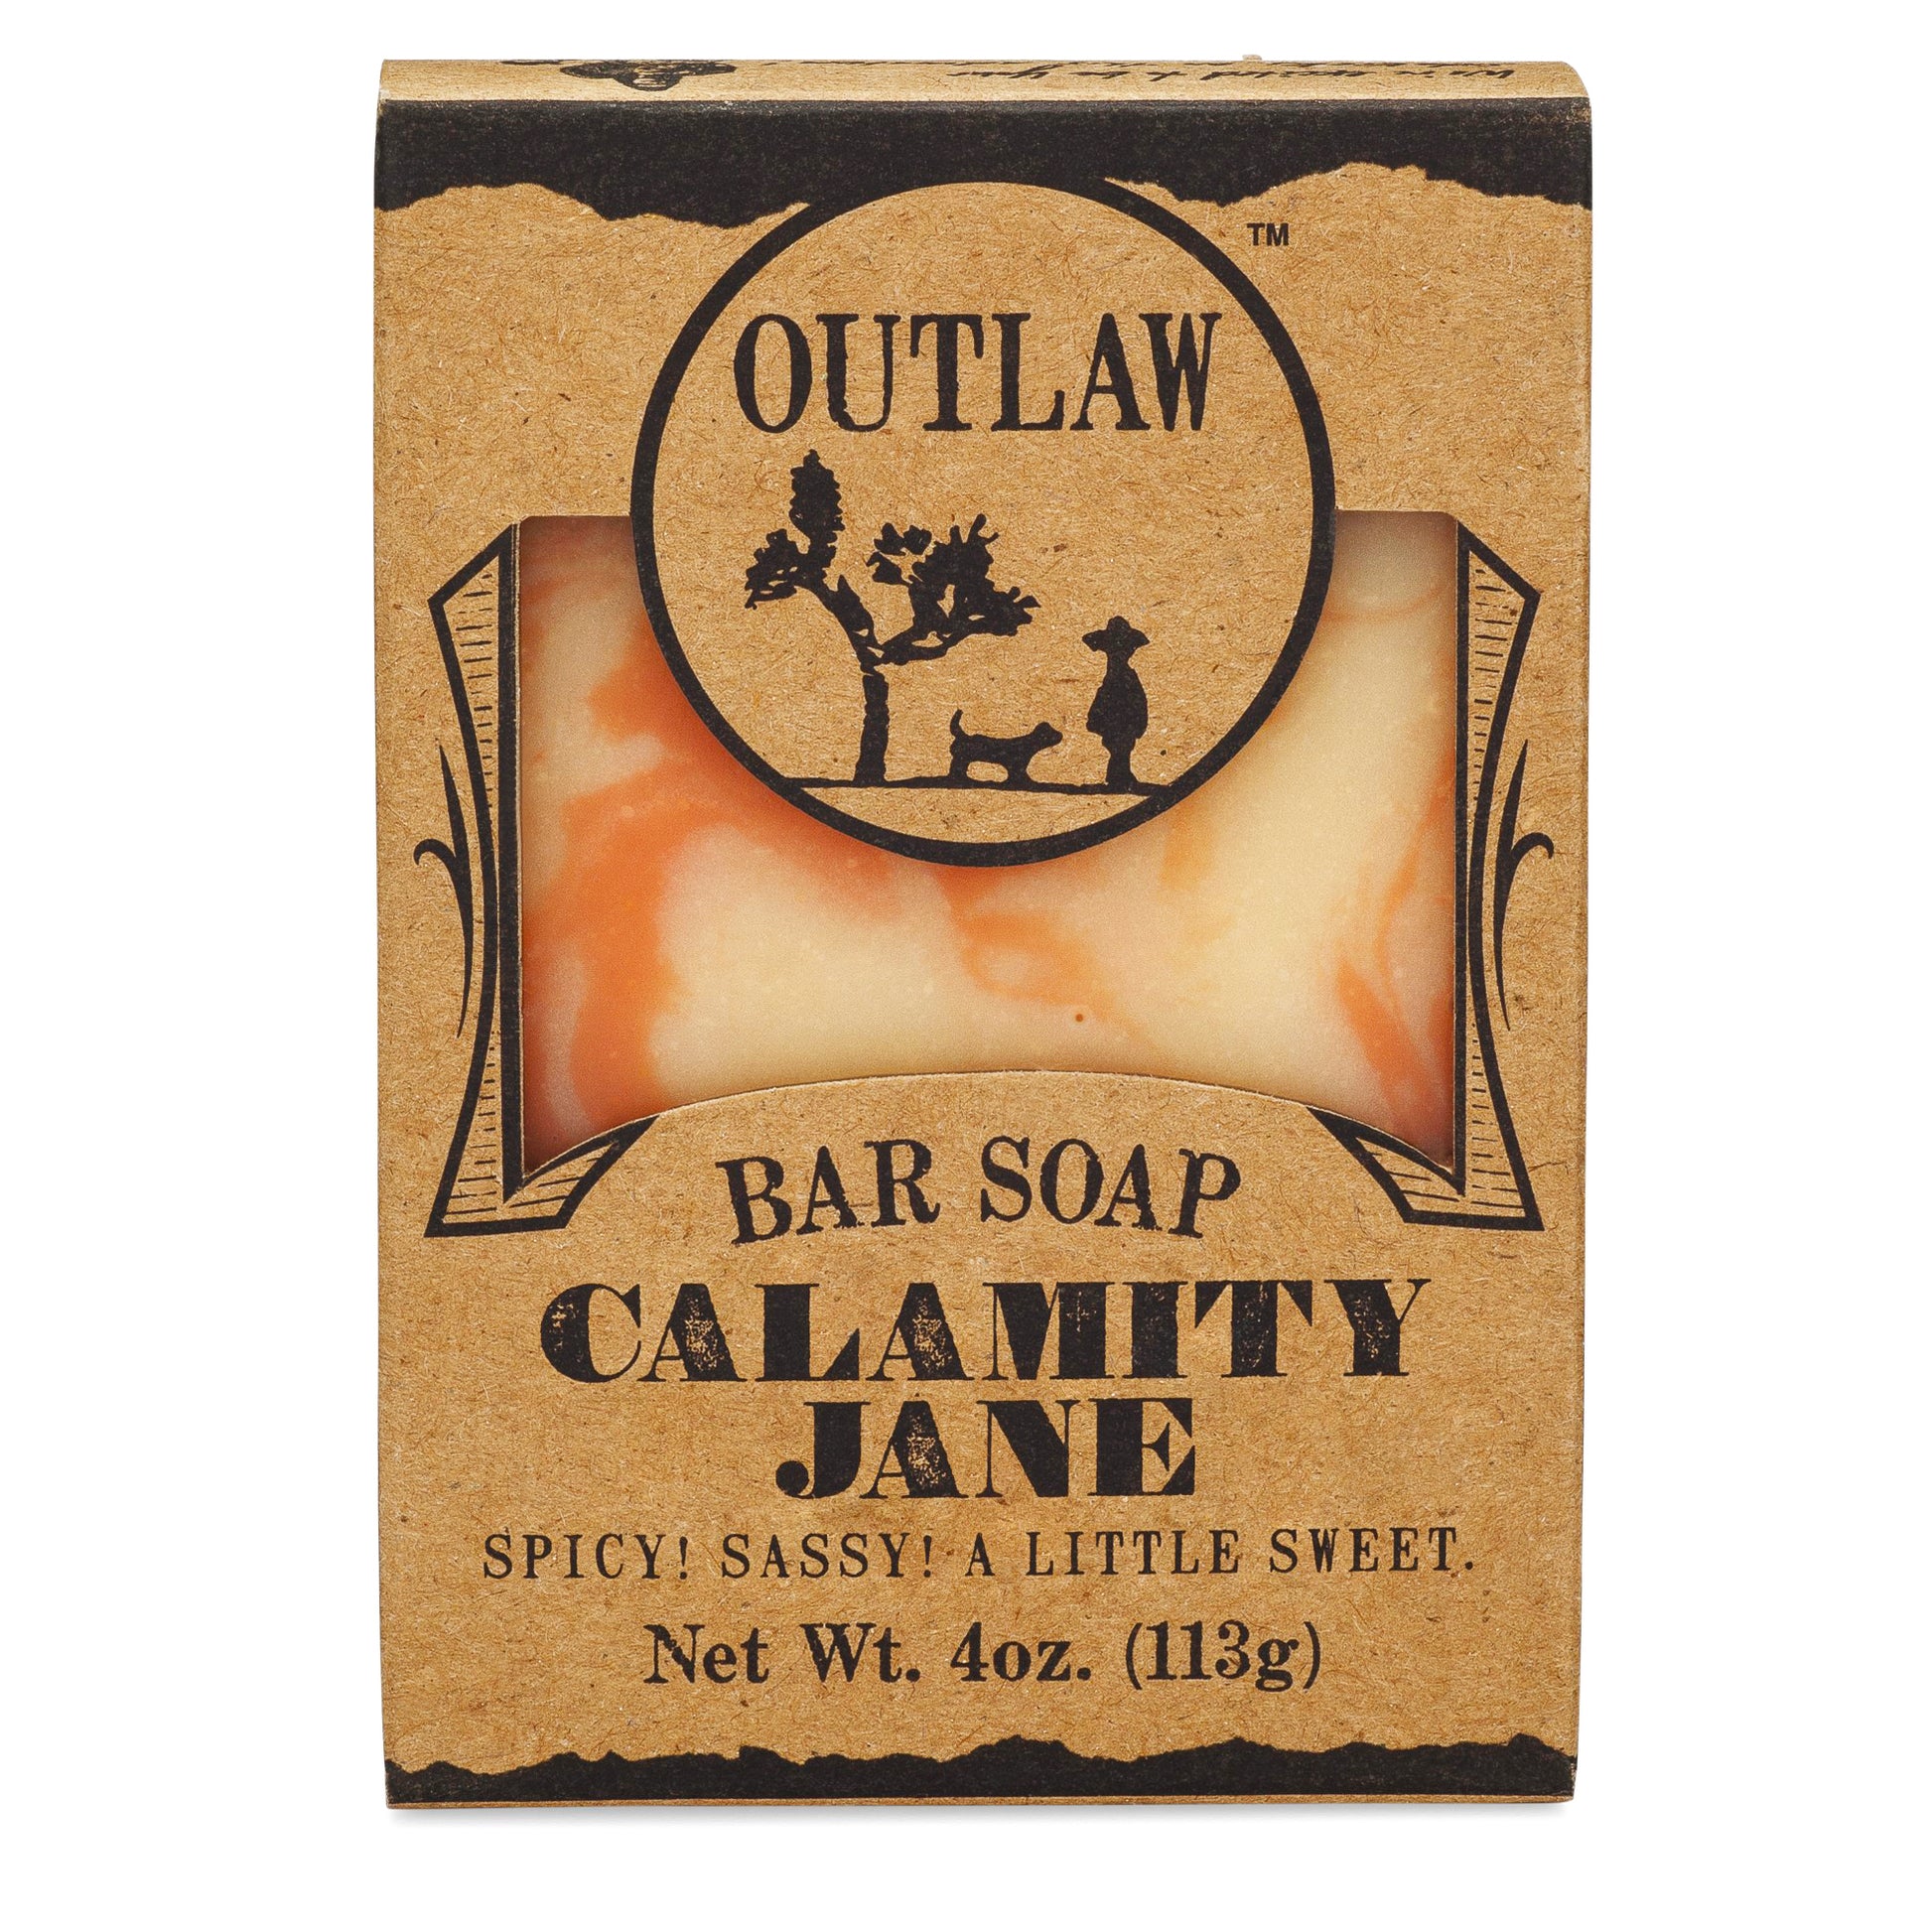 Orange spice soap by Outlaw for men